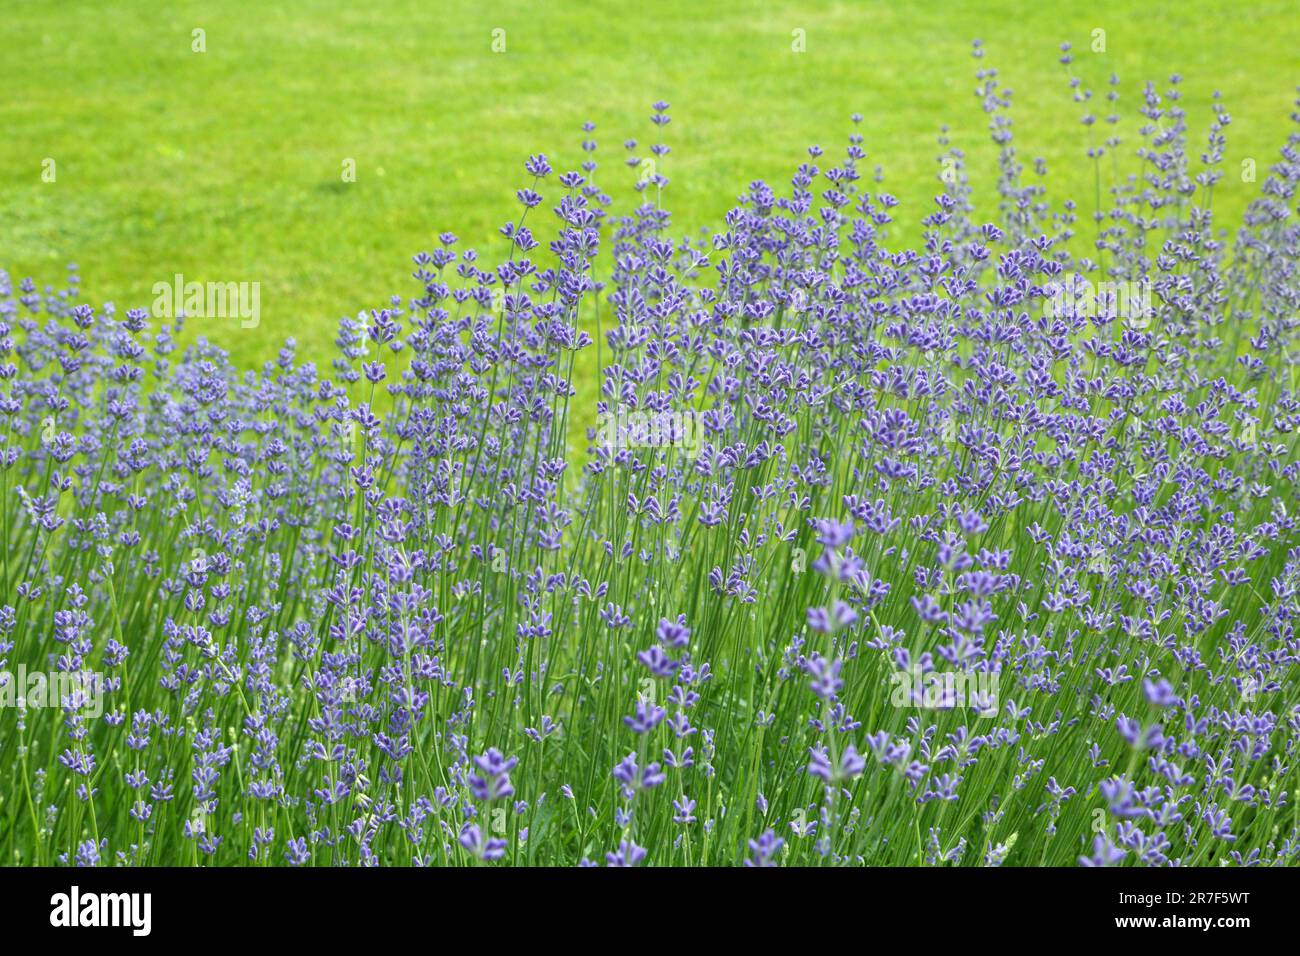 Wild Lavender. Lavender in different shades growing outside the house. Lavender. Stock Photo